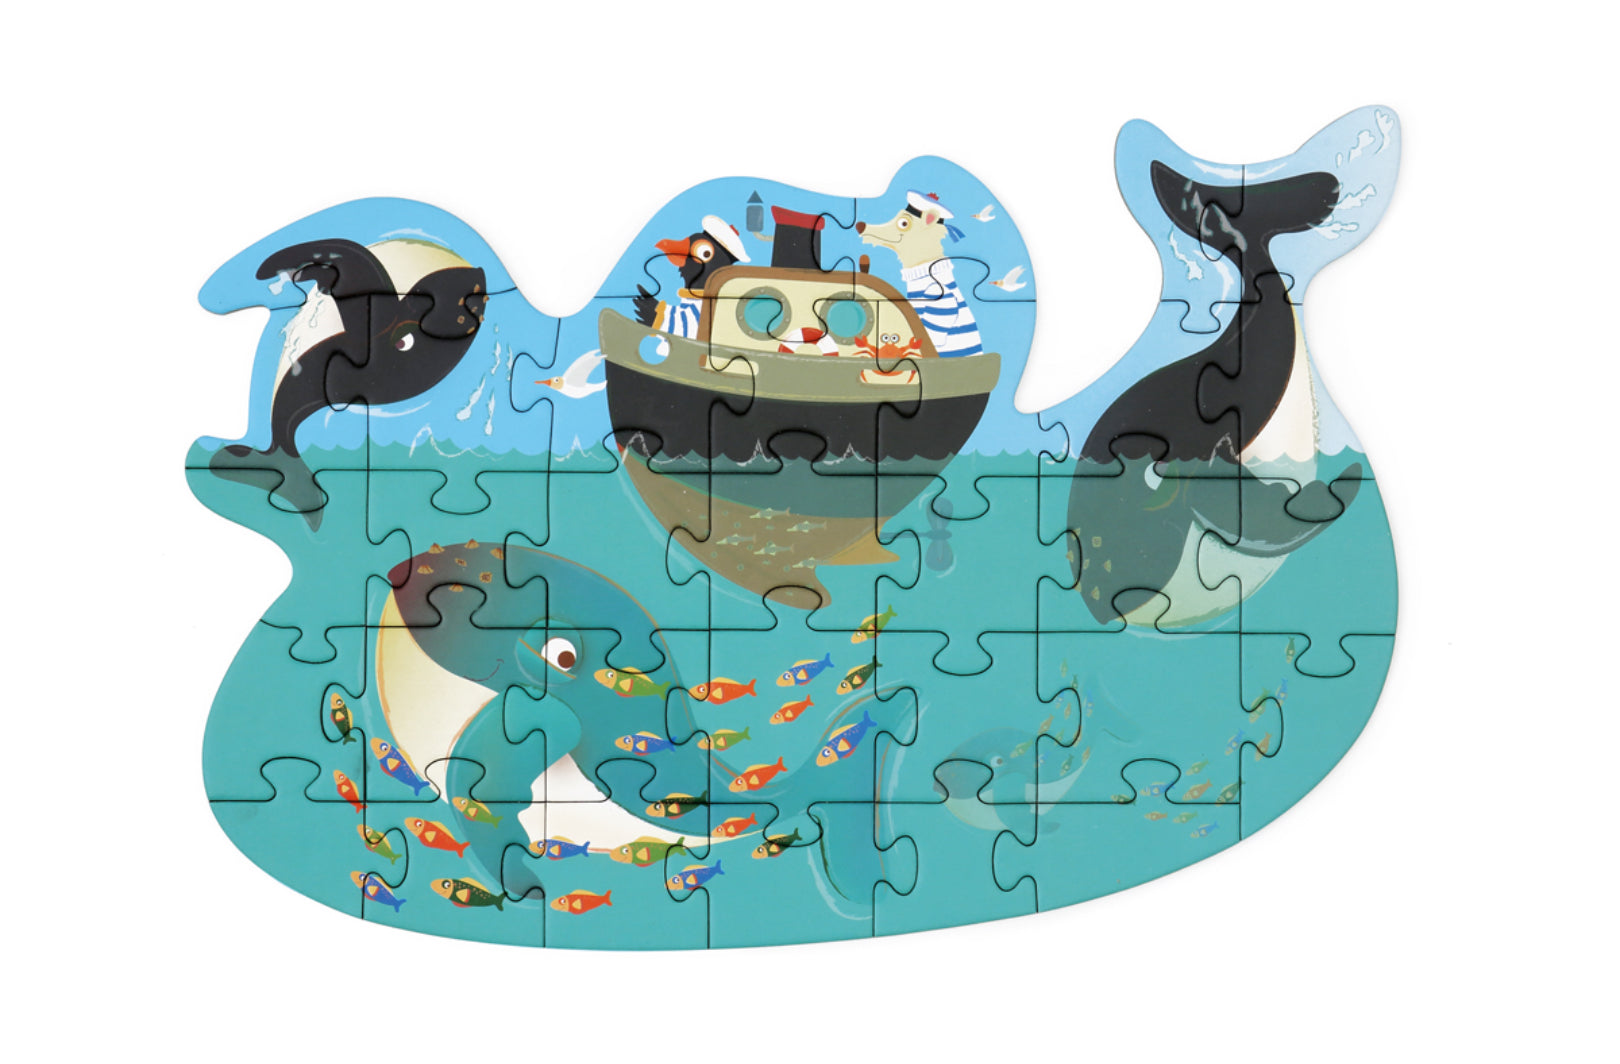 Whales Compact Contour Puzzle (31 pieces) from Scratch